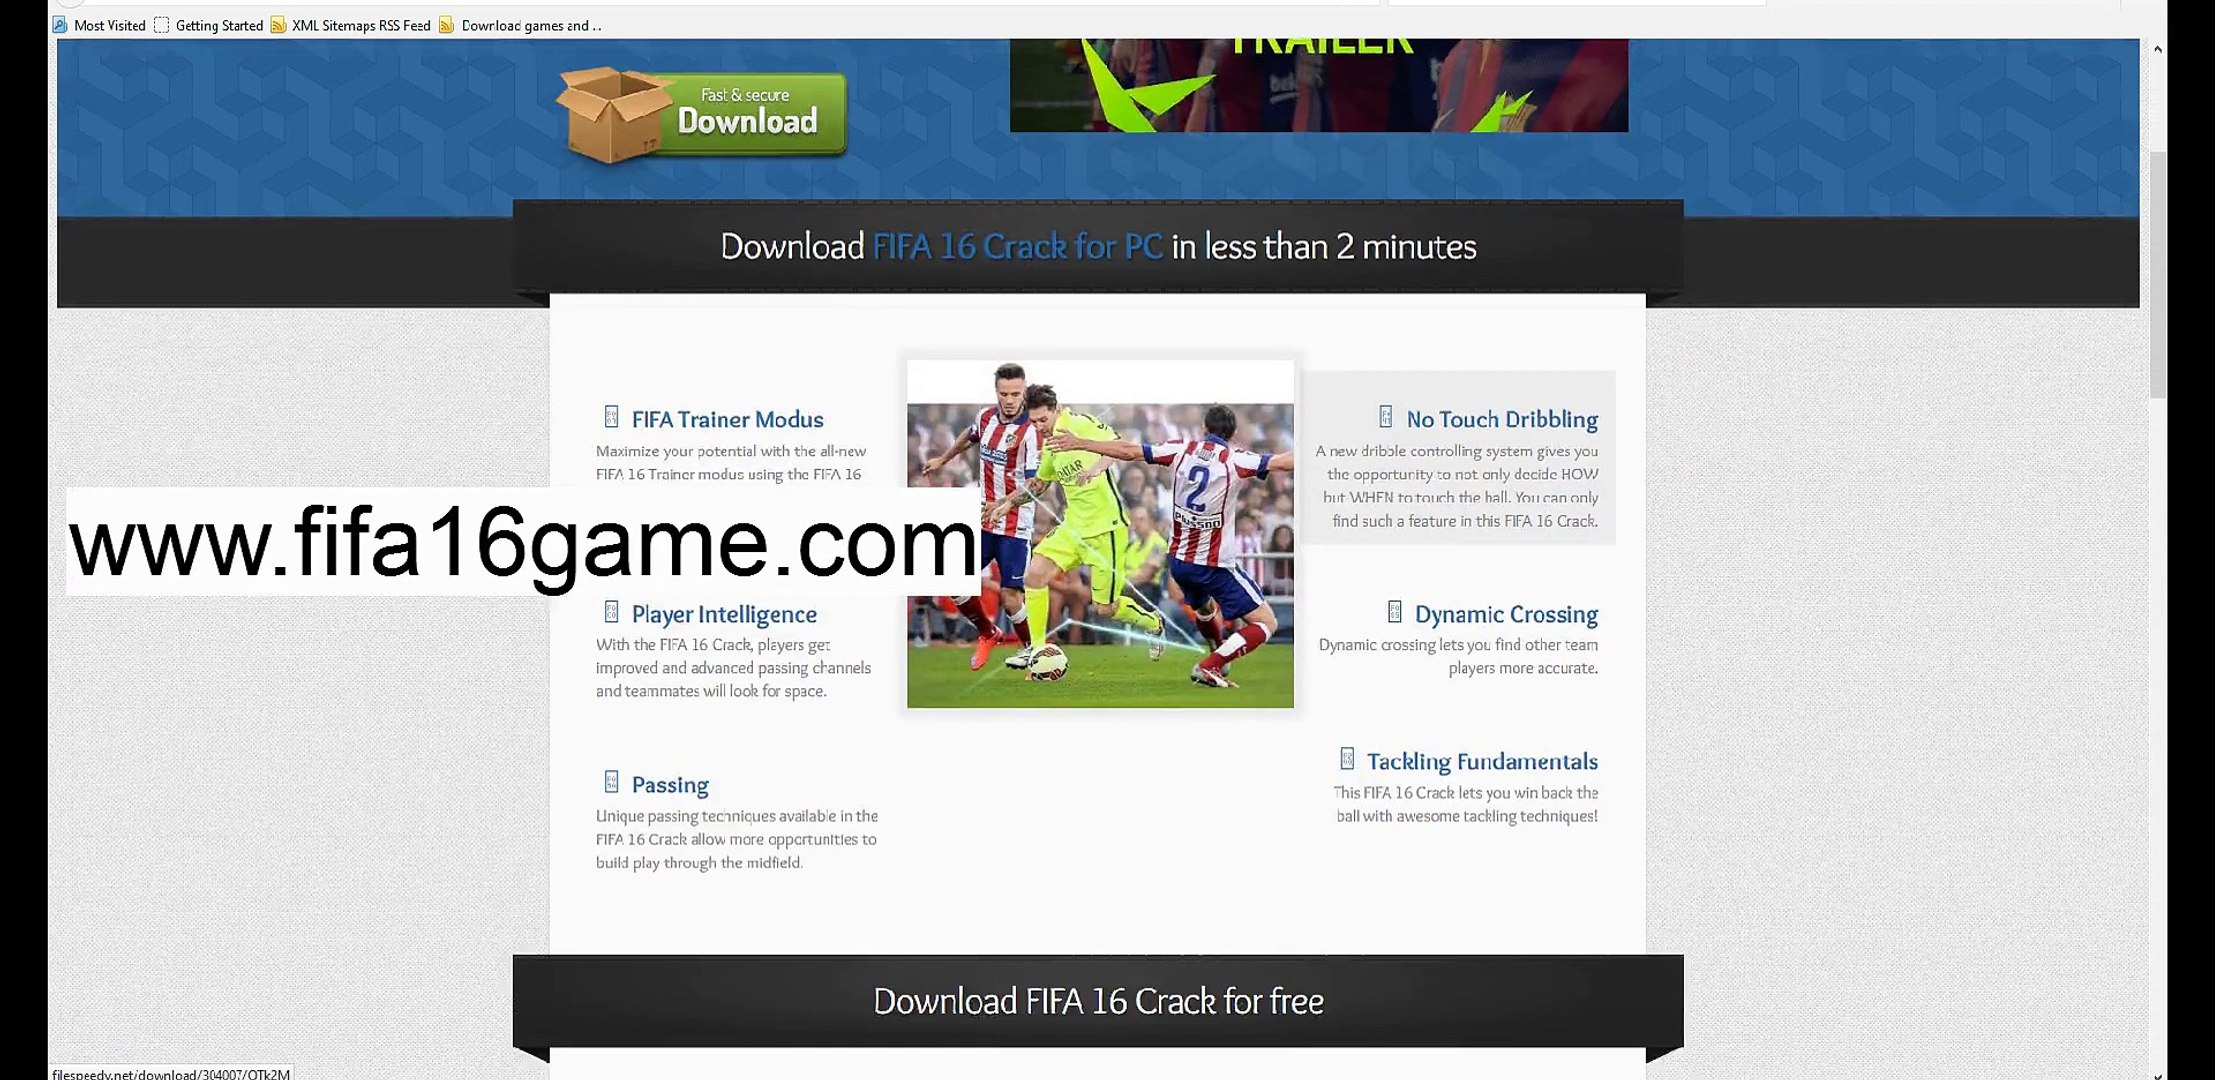 How to get FIFA 16 CD key - video Dailymotion